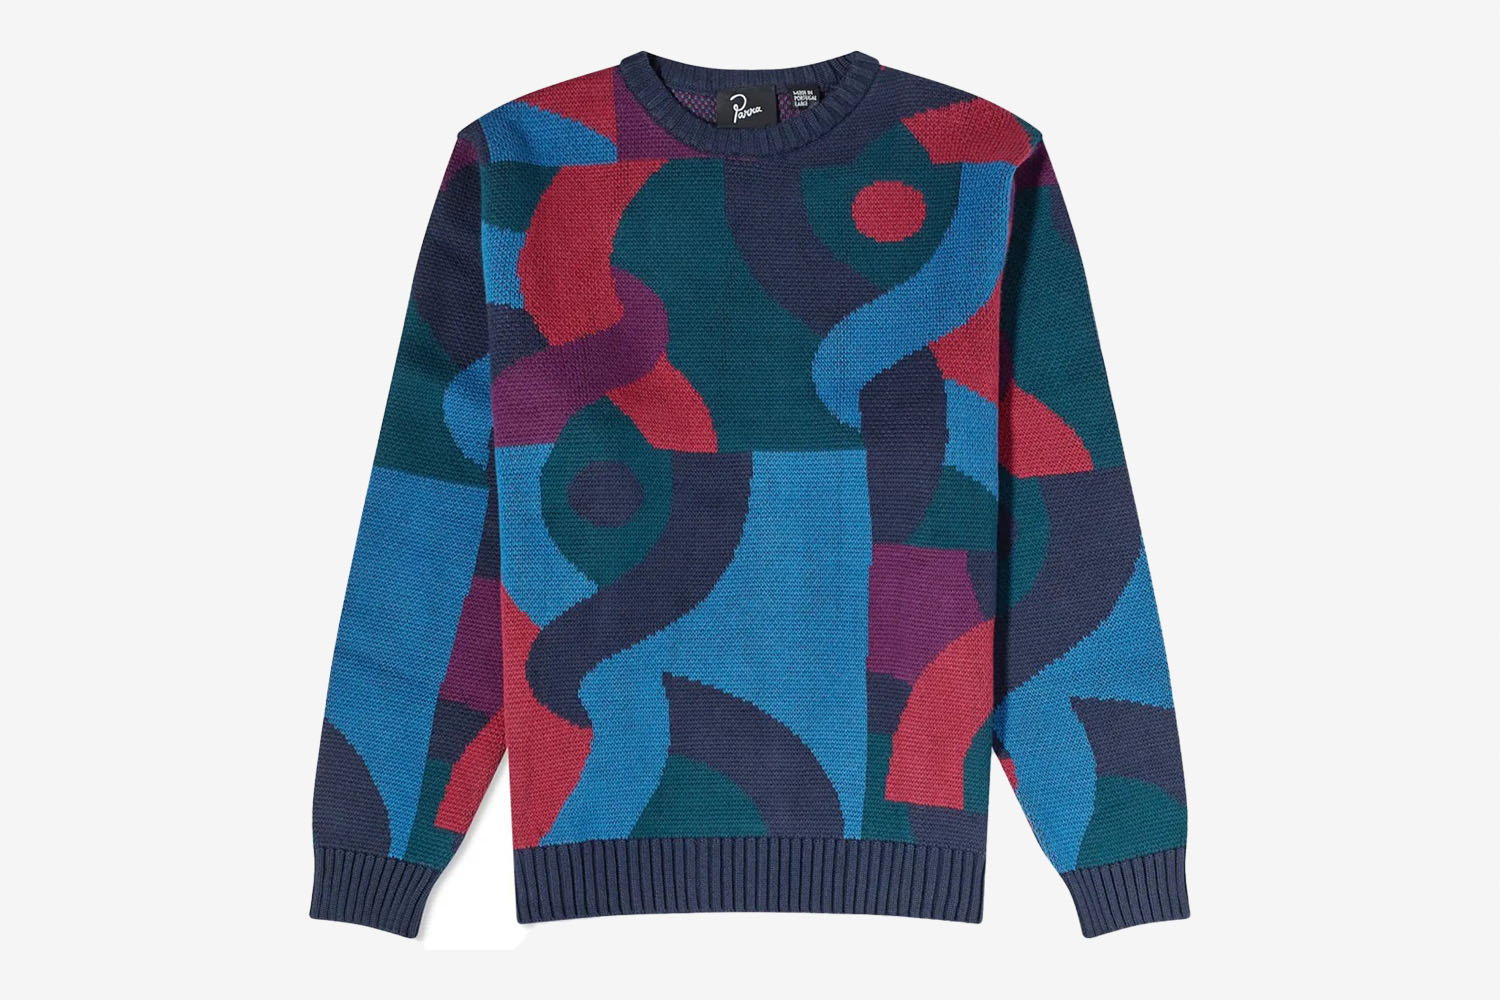 By Parra Knotted Crew Knit